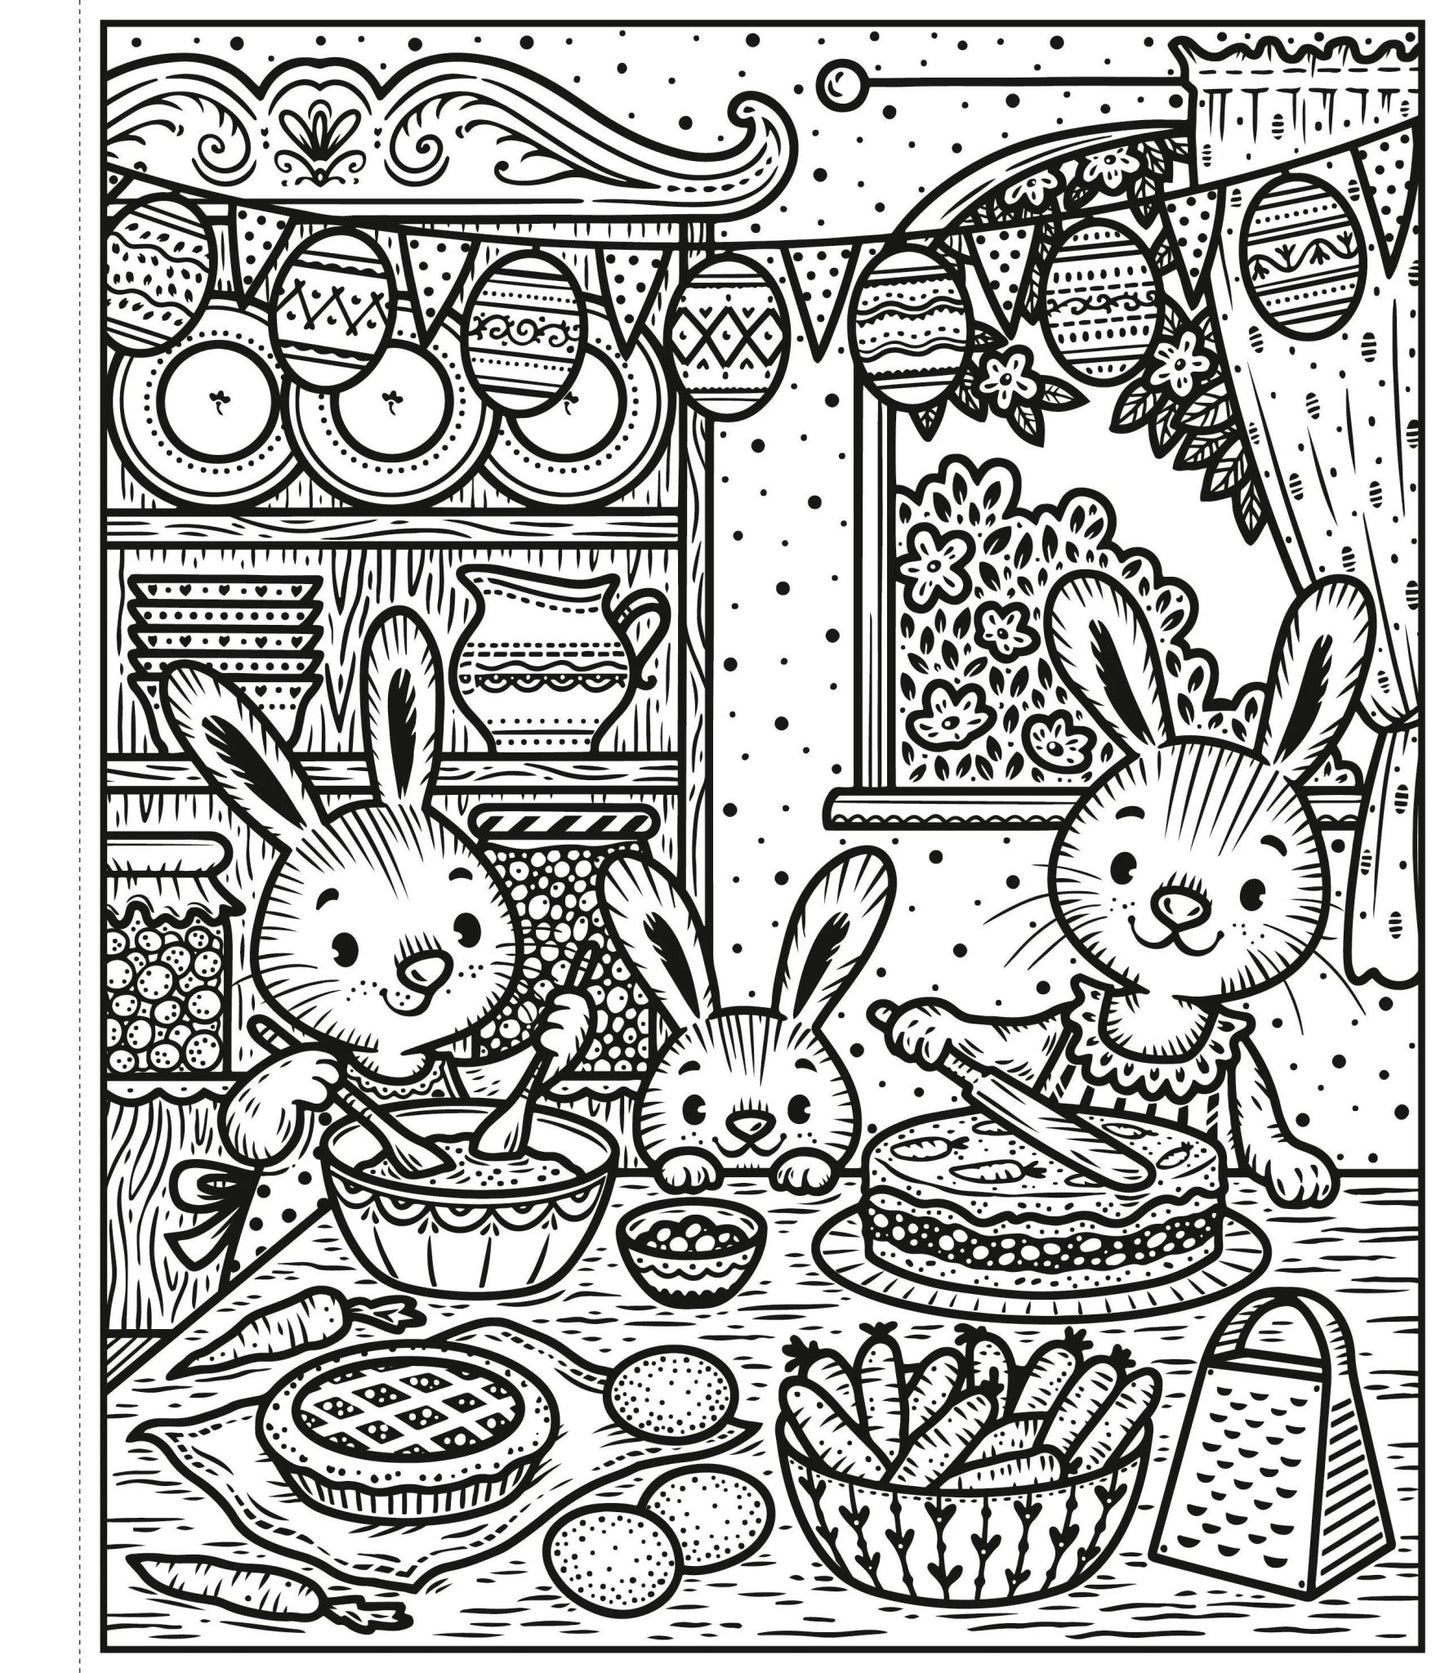 Easter Magic Painting Book - Bookspeed - The Forgotten Toy Shop